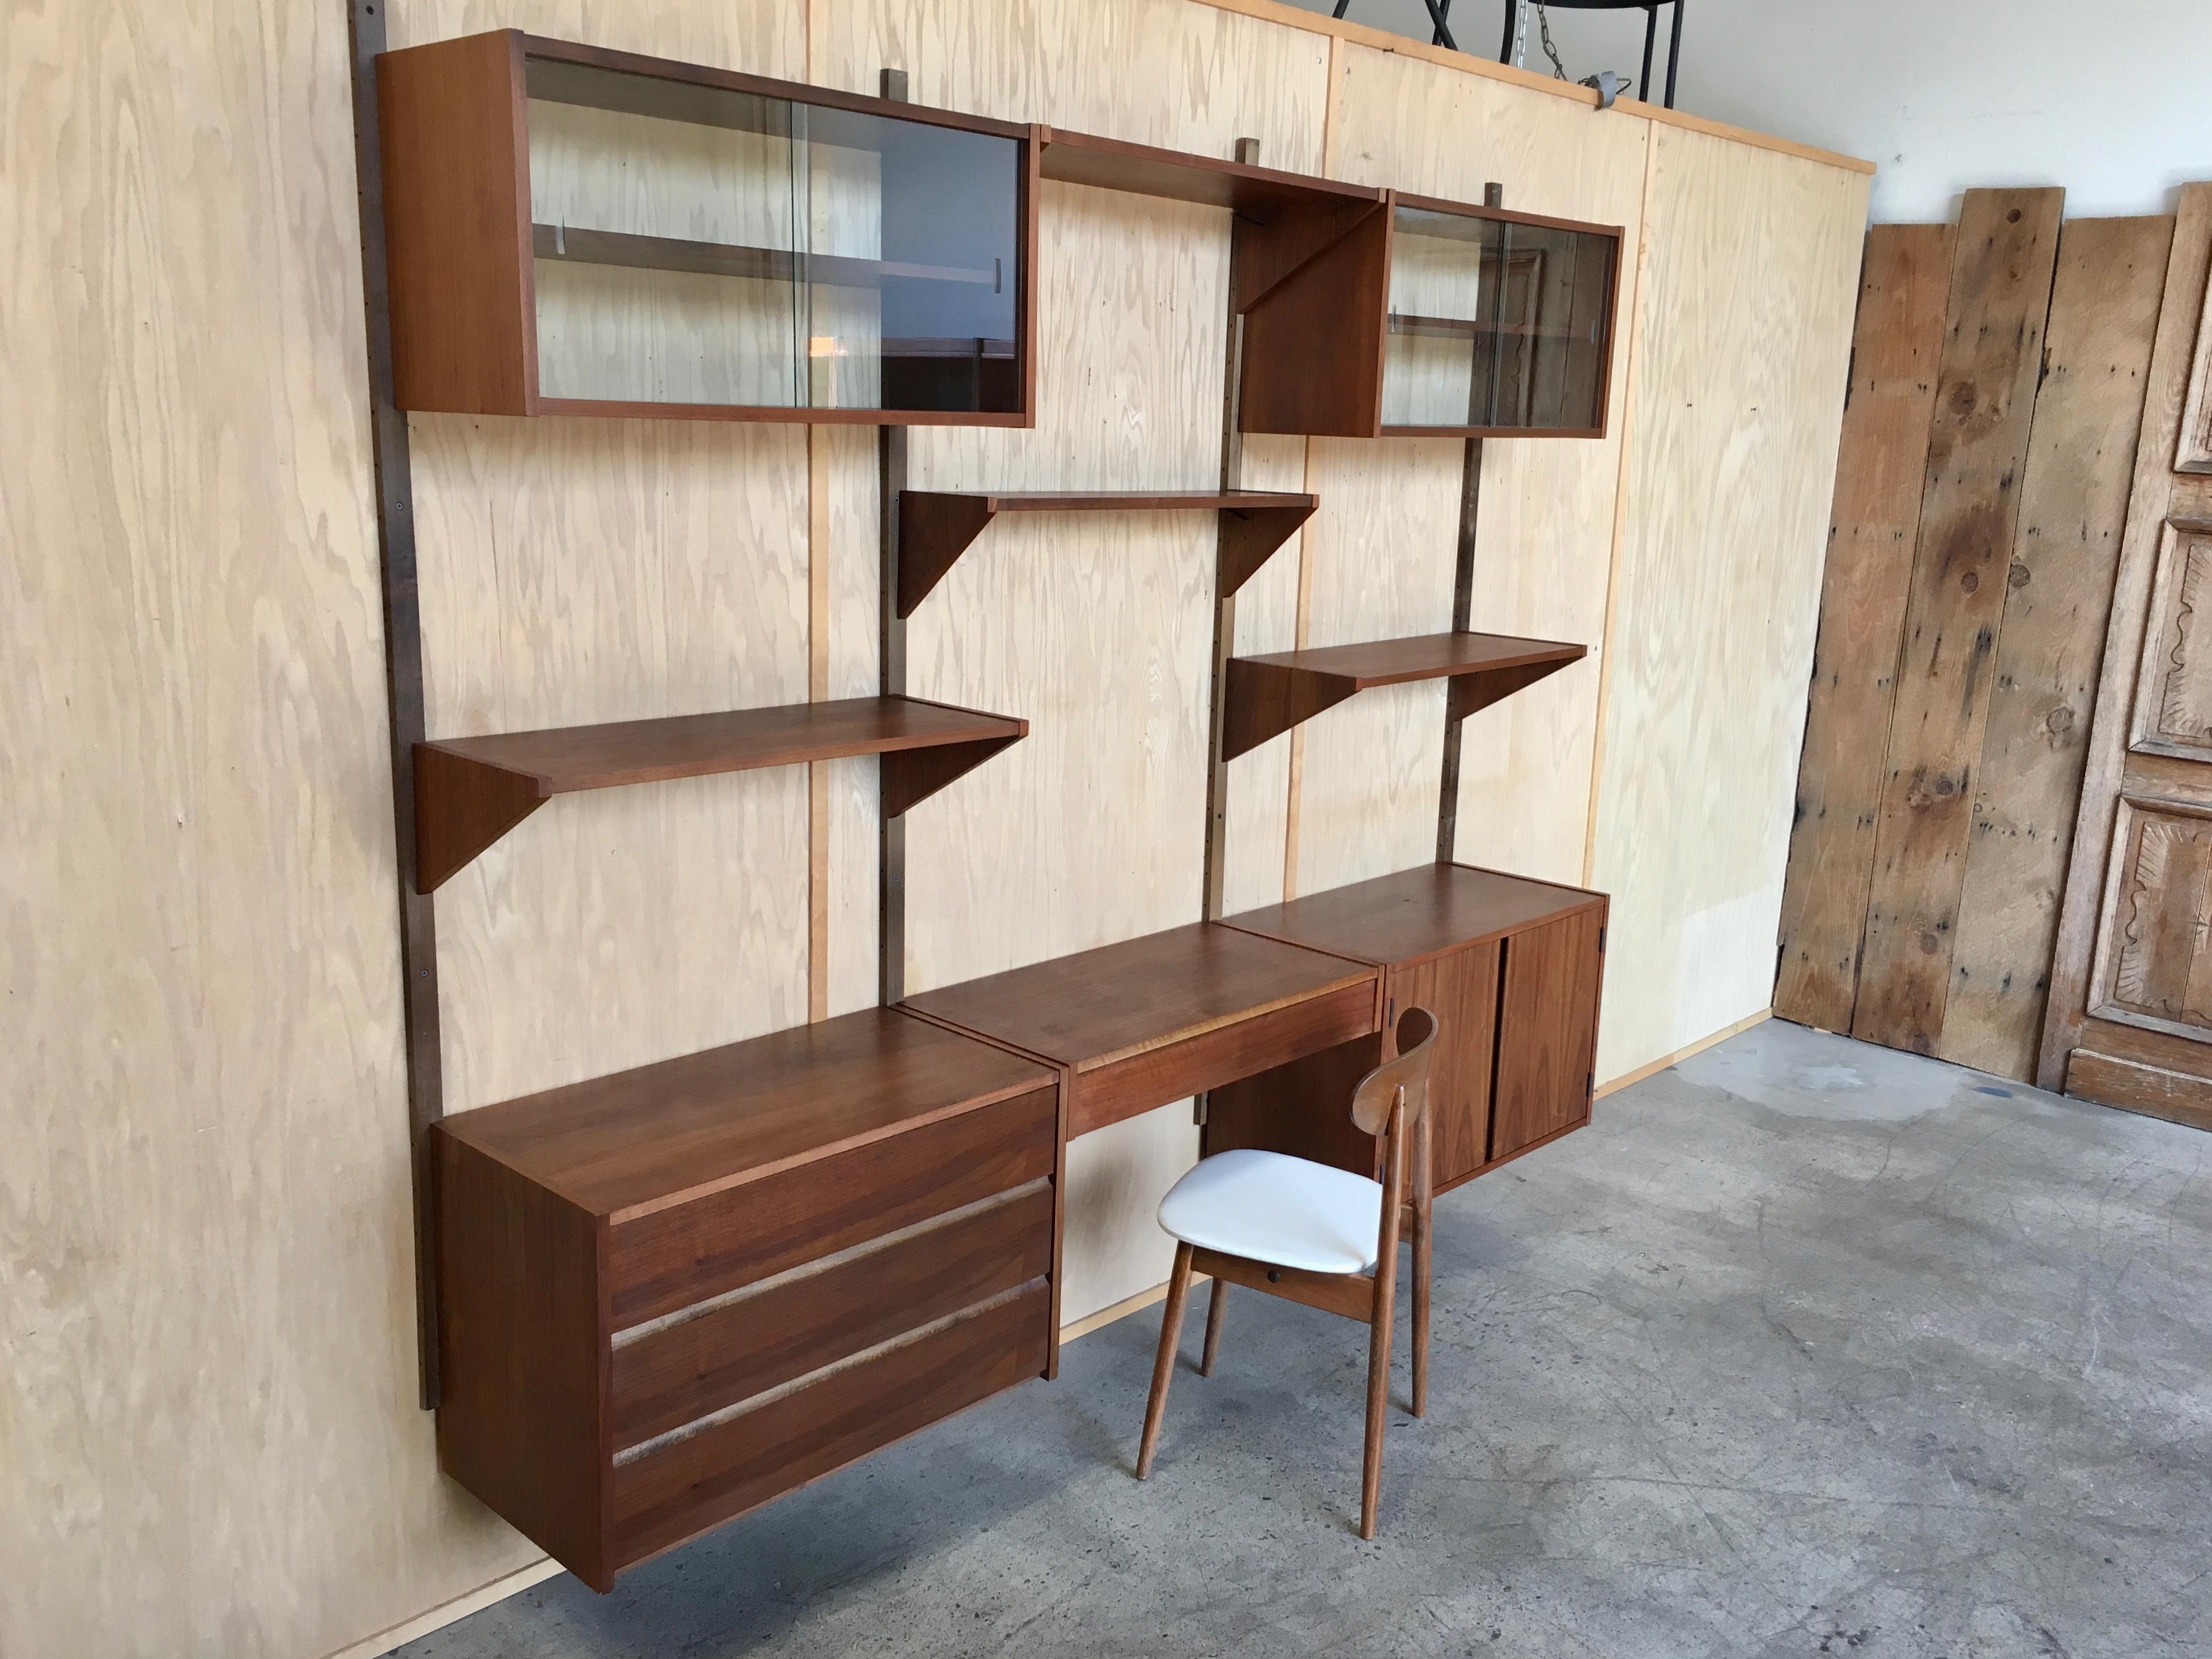 Hanging walnut 3-bay wall unit with fully adjustable cabinets and shelves.